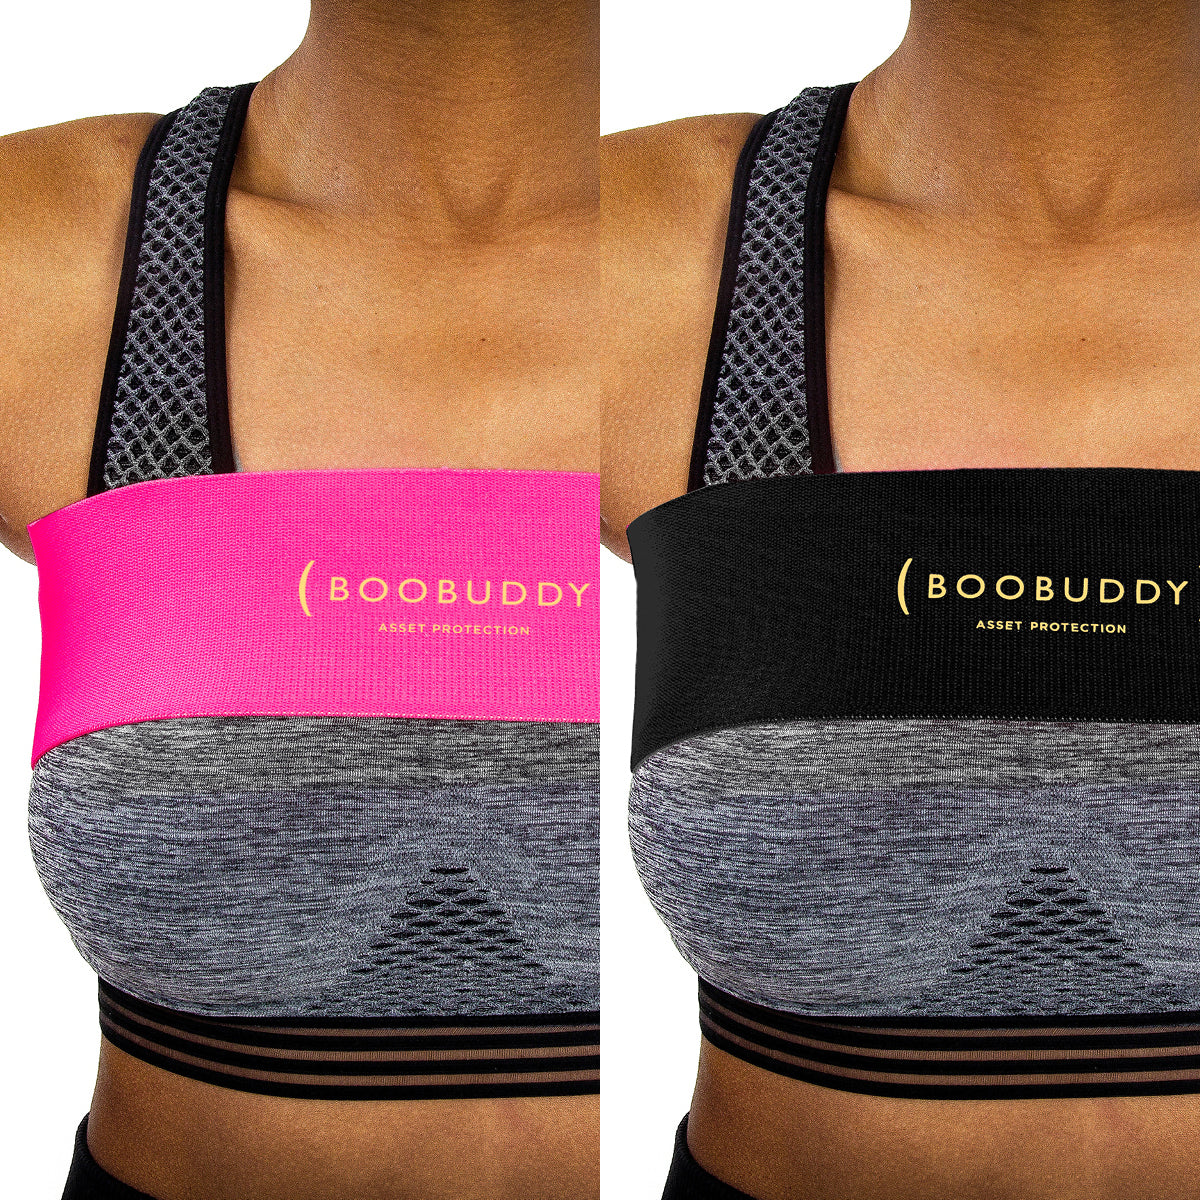 Boobuddy Adjustable Breast Support Band | Black & Pink Bundle | How to Wear a Boobuddy